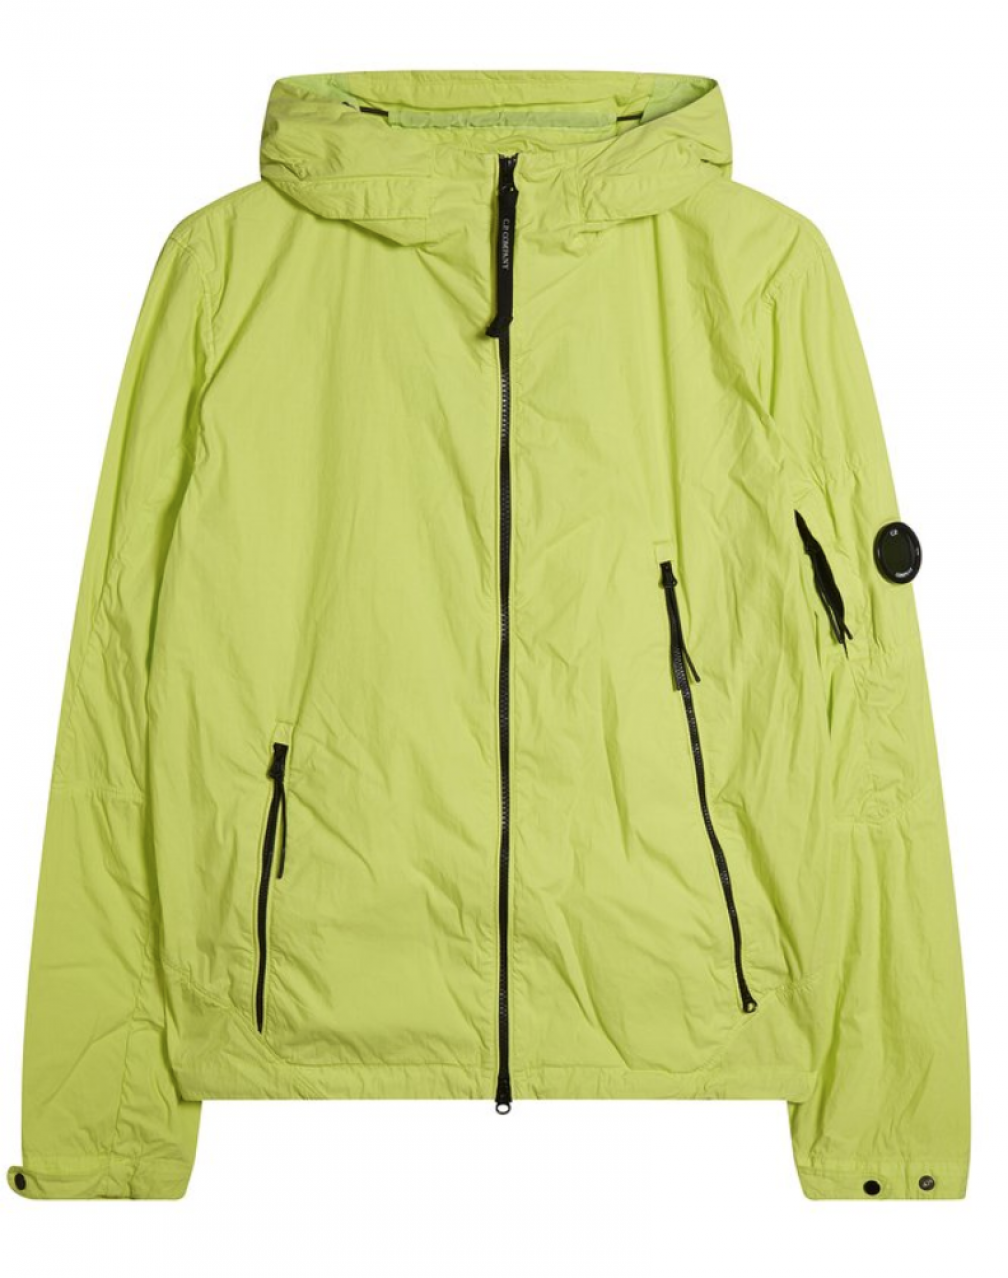 These lightweight jackets are perfect for festival season - - Mixmag